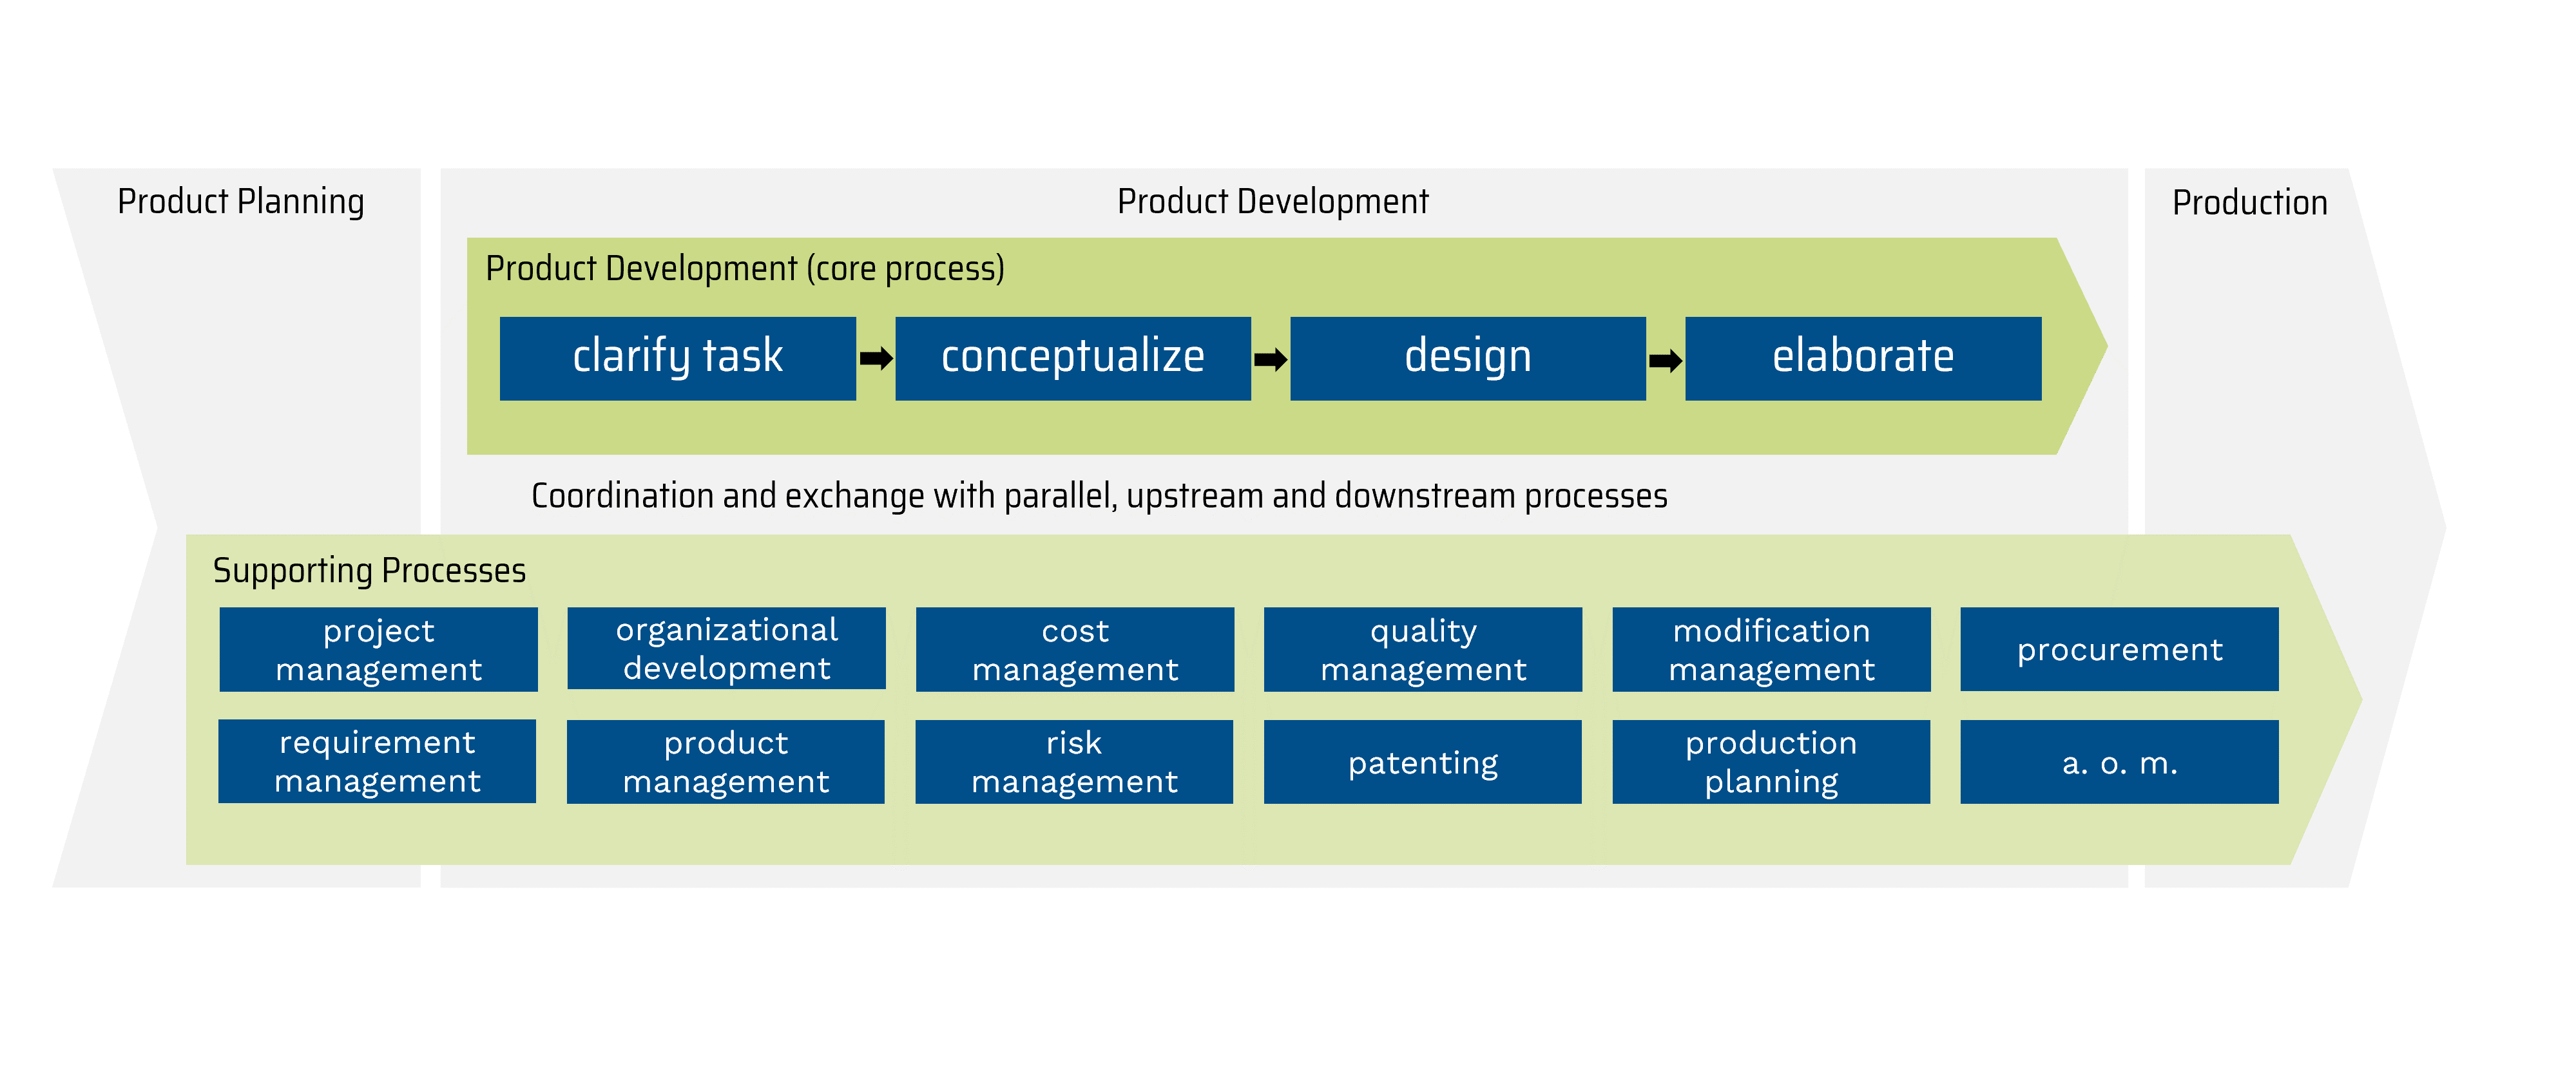 The diagram shows the integration of supporting accompanying processes as a characteristic of integrated product development.